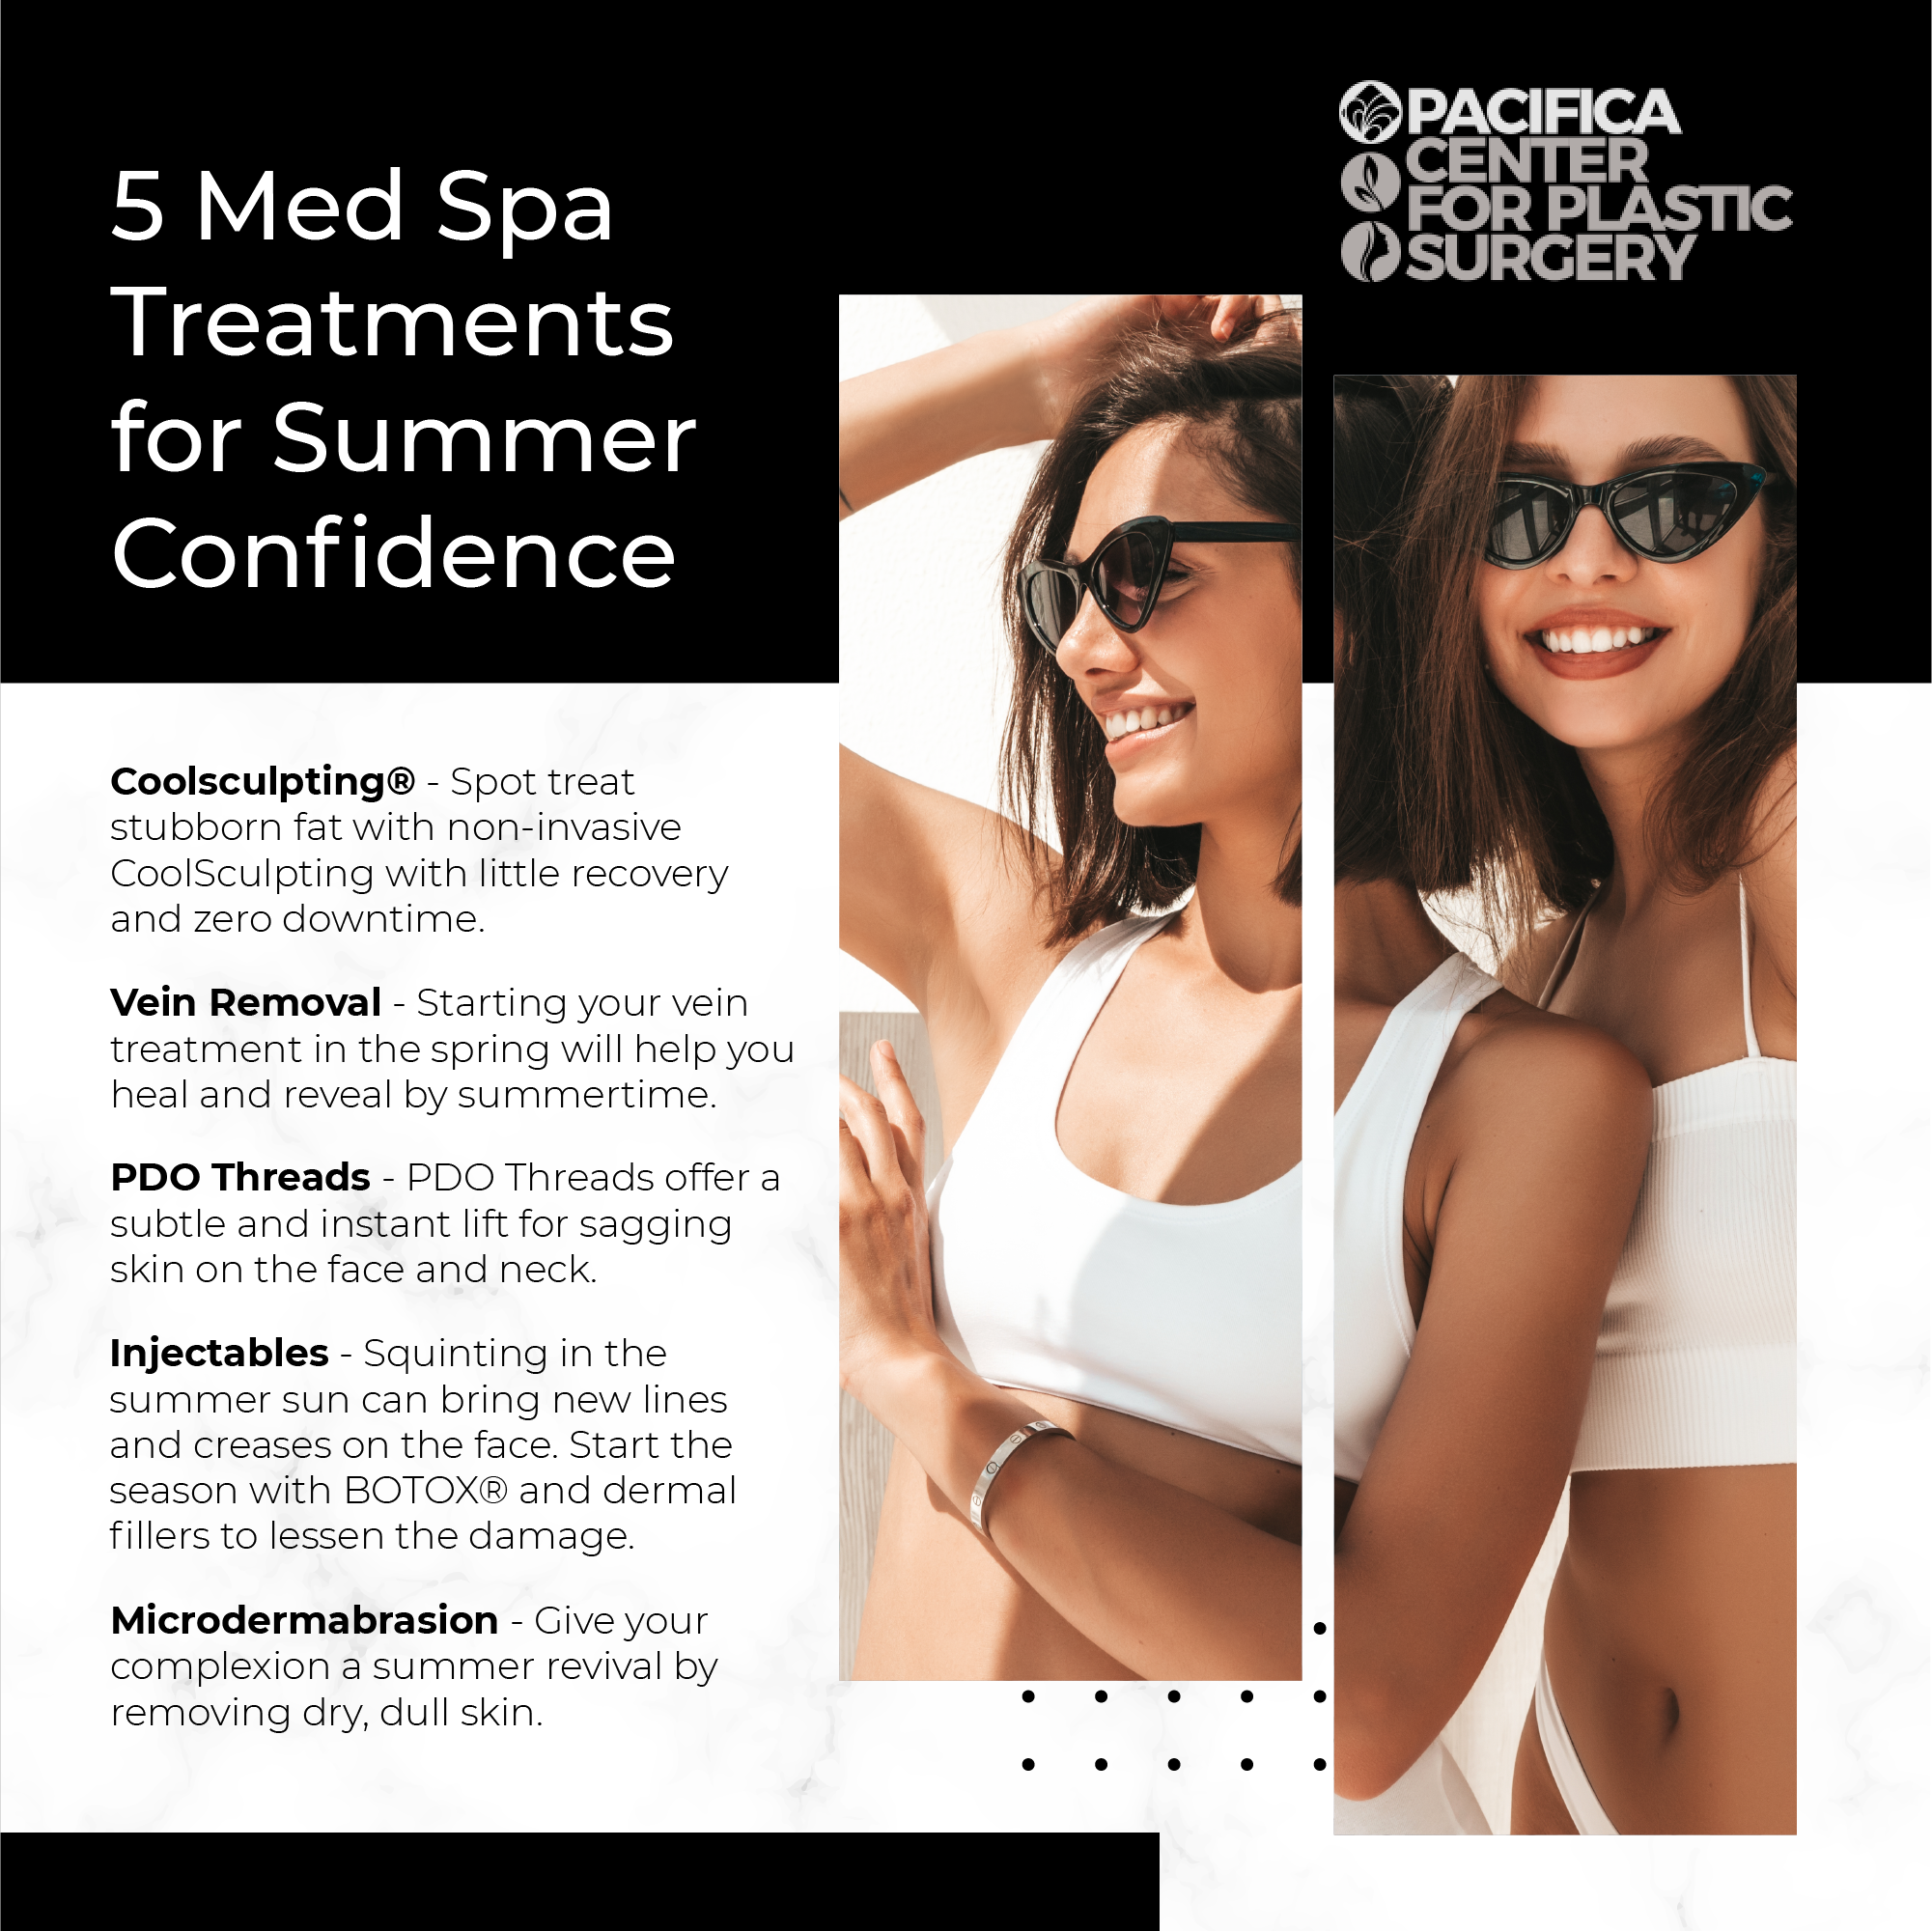 5 Med Spa Treatments for Summer Confidence